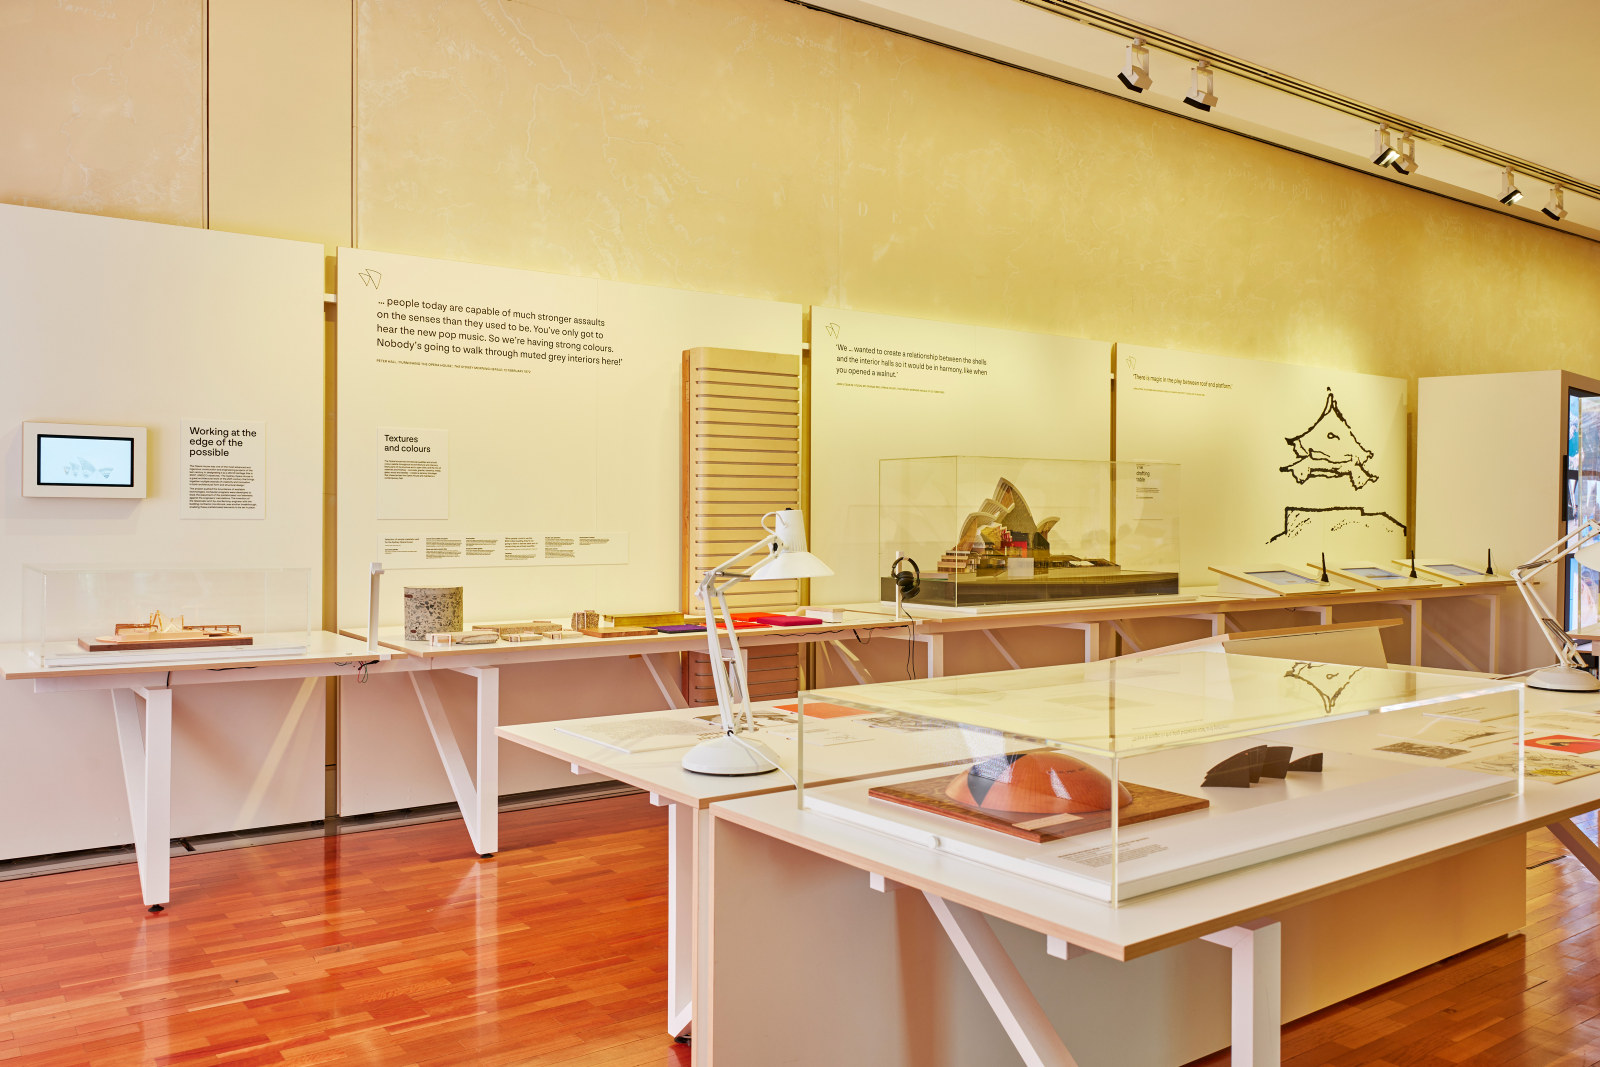 View of the Great Urban Sculpture - Architects Desk in Gallery 3 - The People's House marketing & installation photoshoot